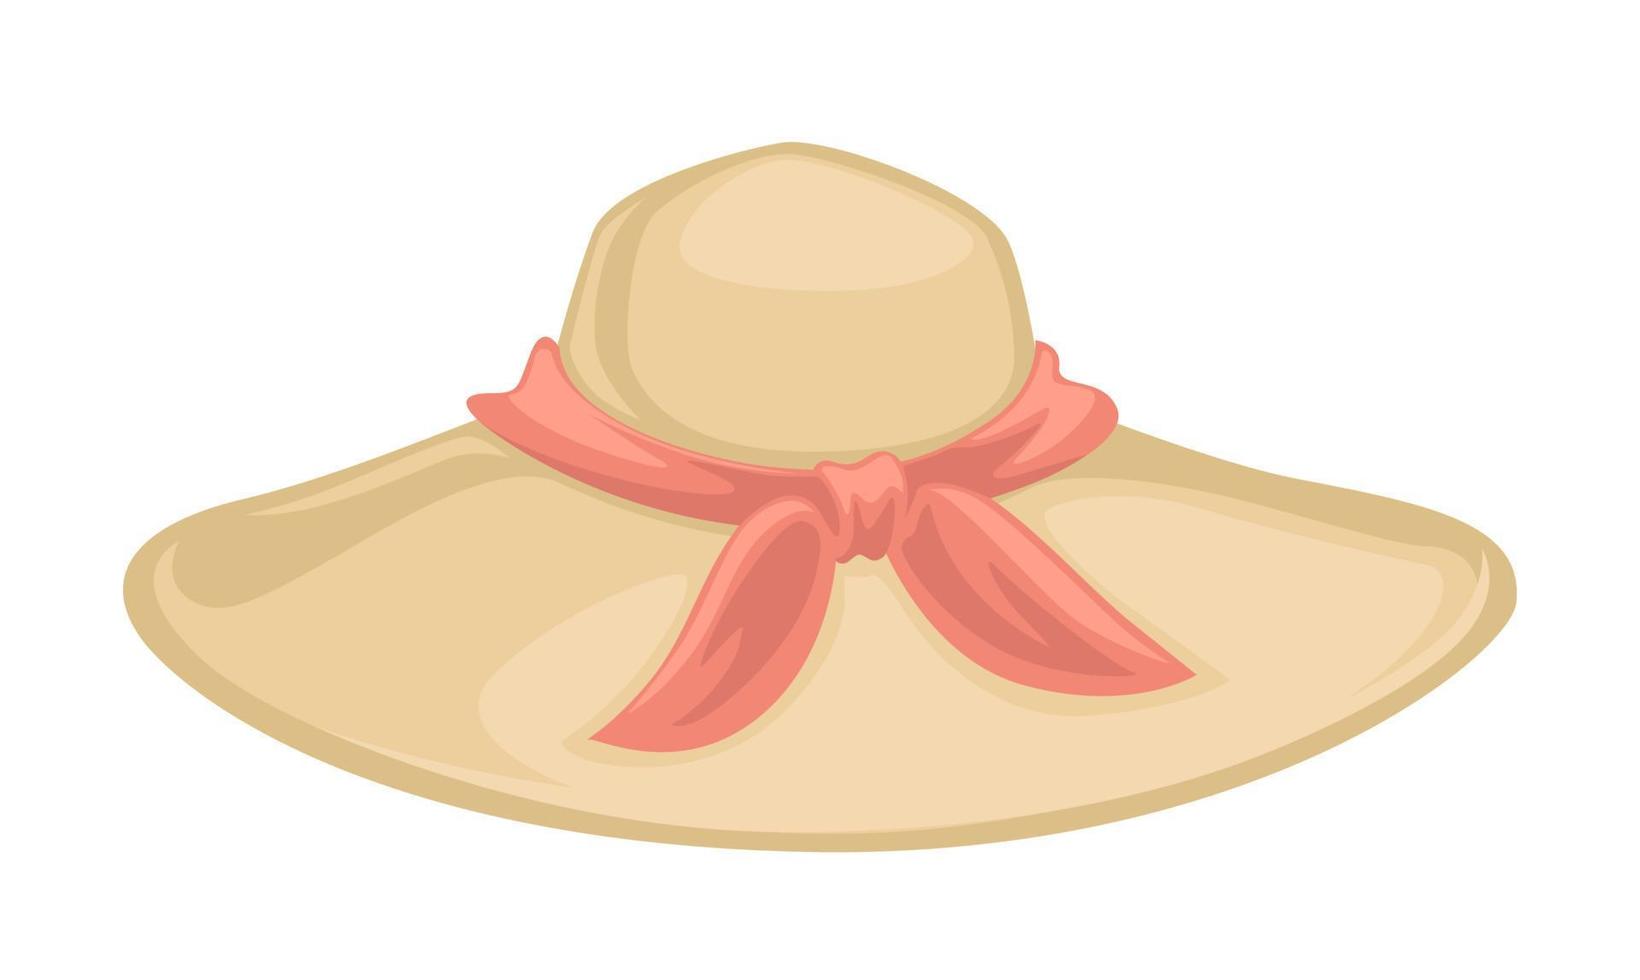 Classic hat with ribbon bow, fashionable women accessory vector